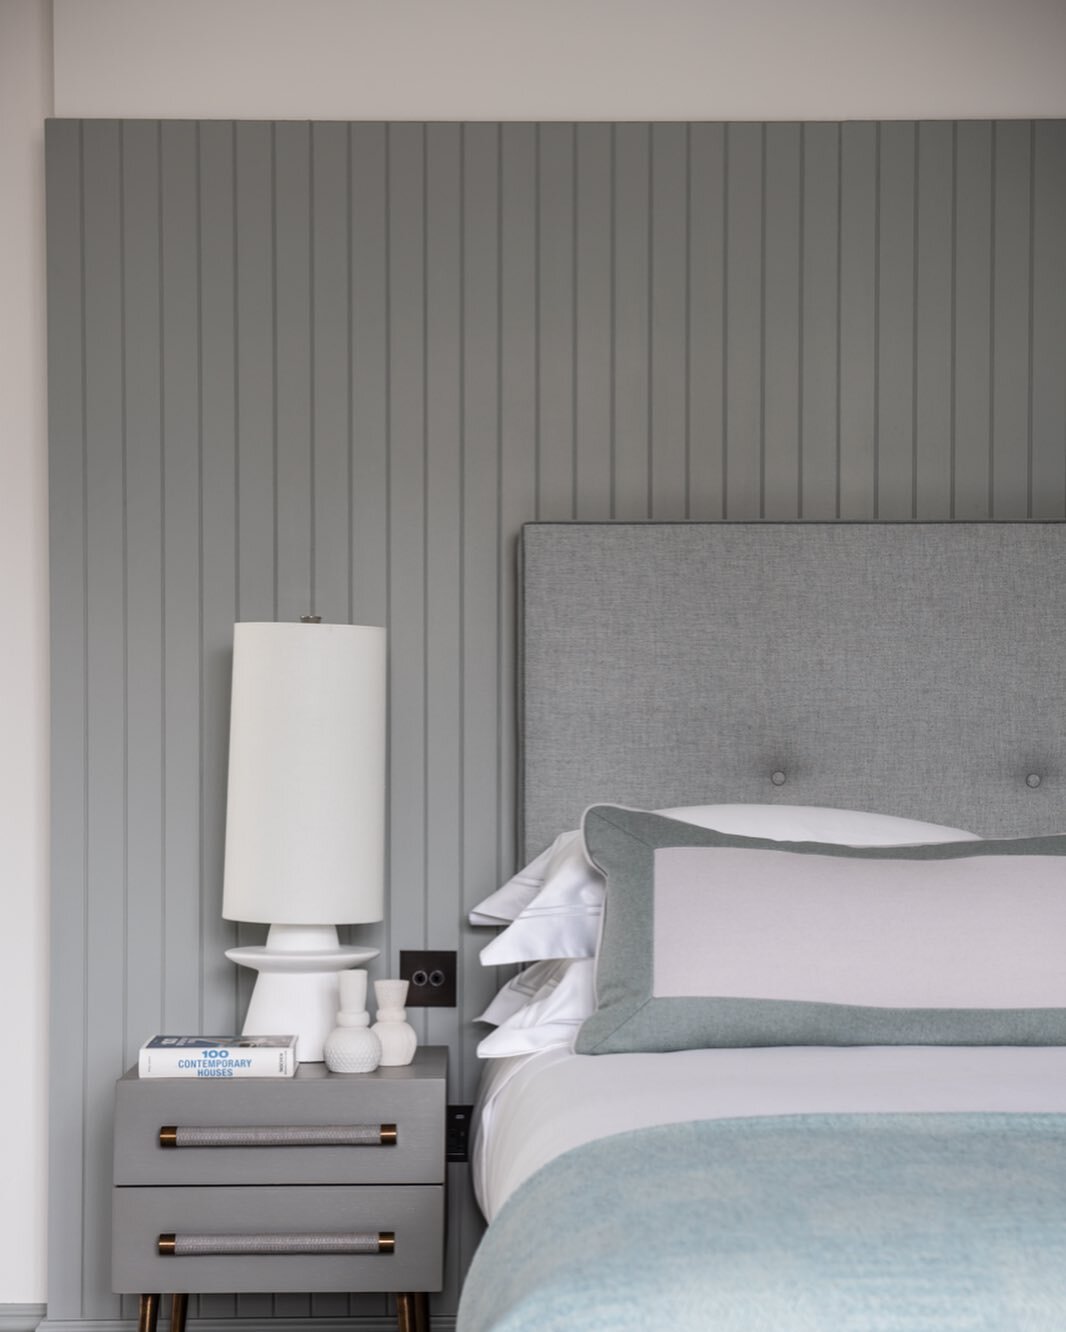 Simple, calm bedroom we designed for this loft space. 
Interiors @schillerbeynoninteriors Photography @jodystewartphotography Architecture @shapelondonarchitects Construction @portviewfitout  #panelling #bedroomdecor #calm #calminteriors #chill #slee